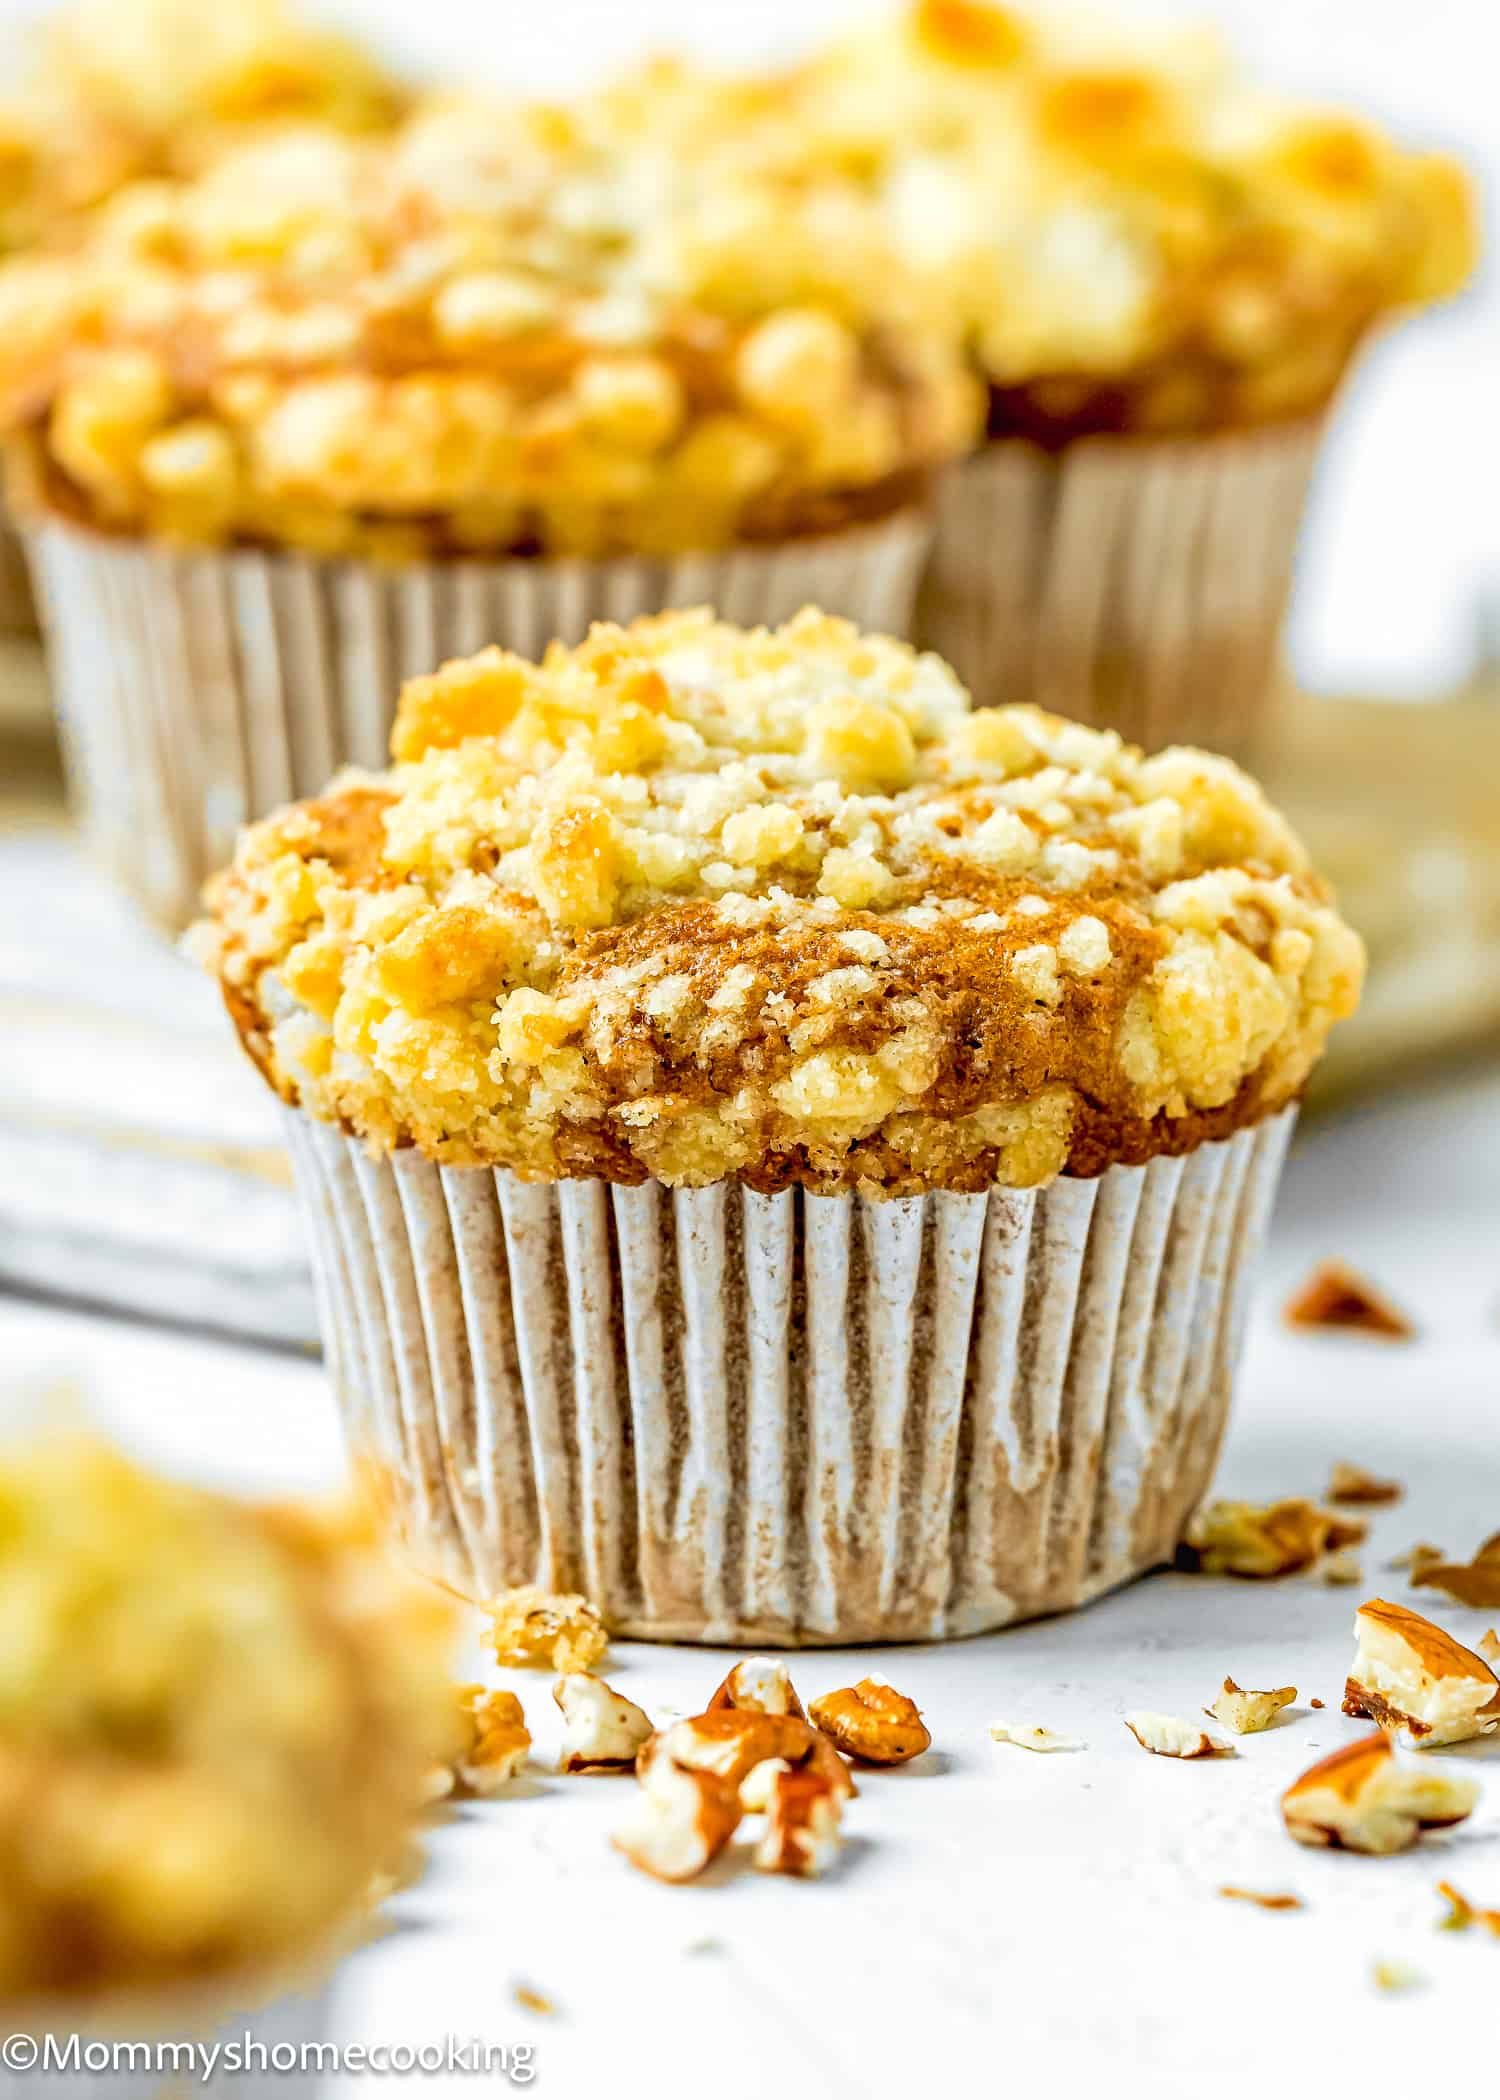 Hummingbird Muffins with crumb on top on a white surface with more muffins in the background.